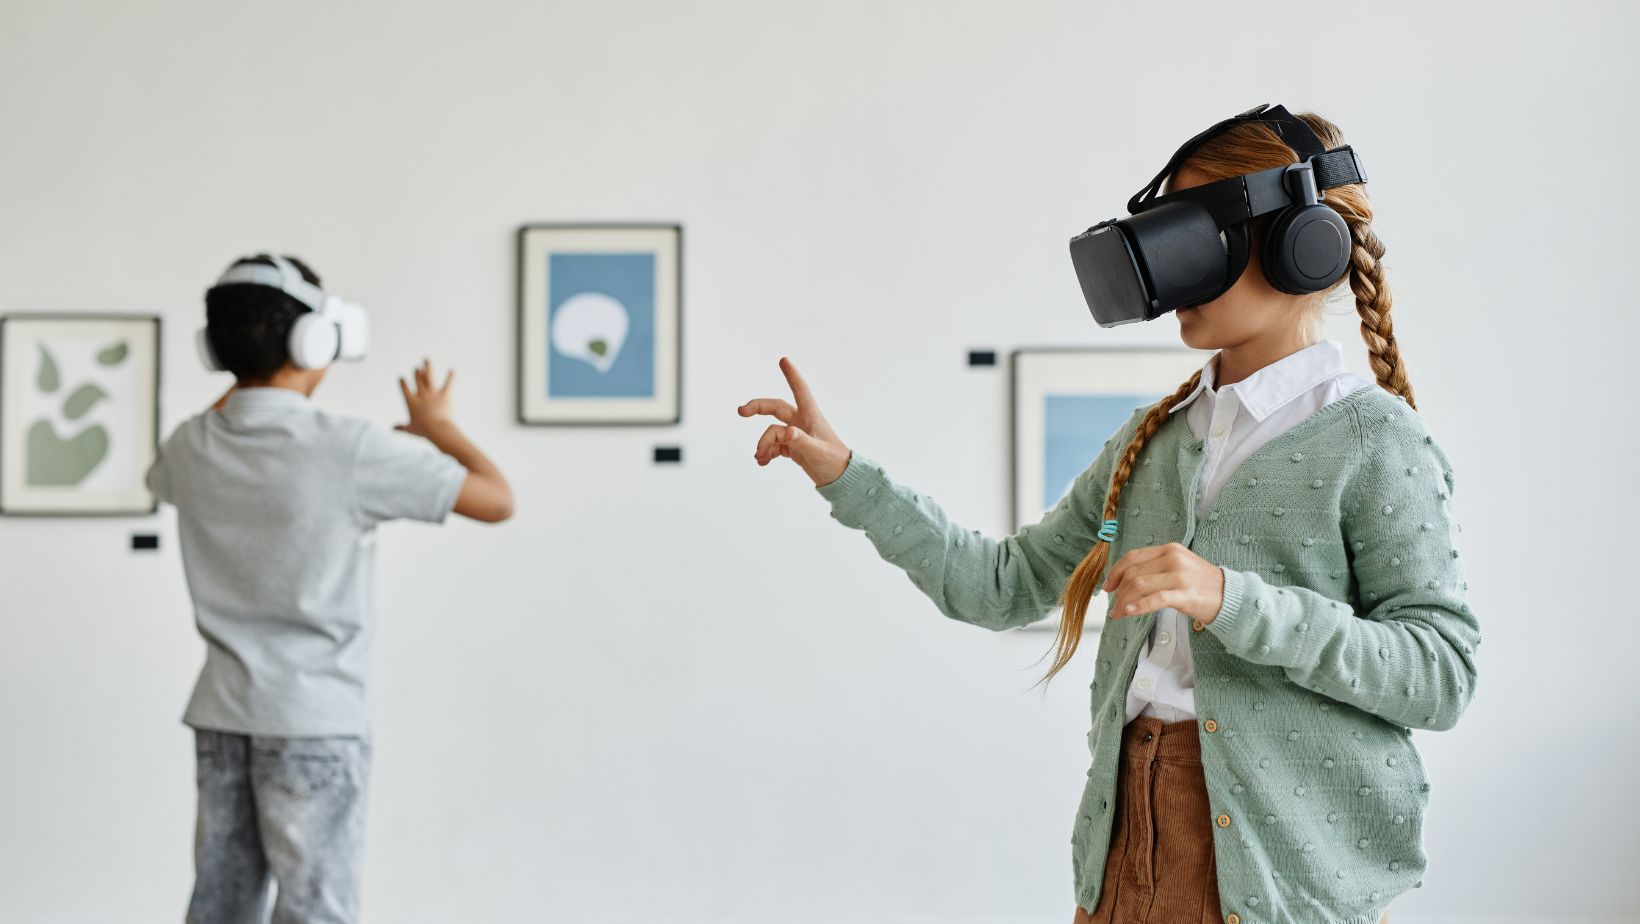 immersive learning experiences in vr